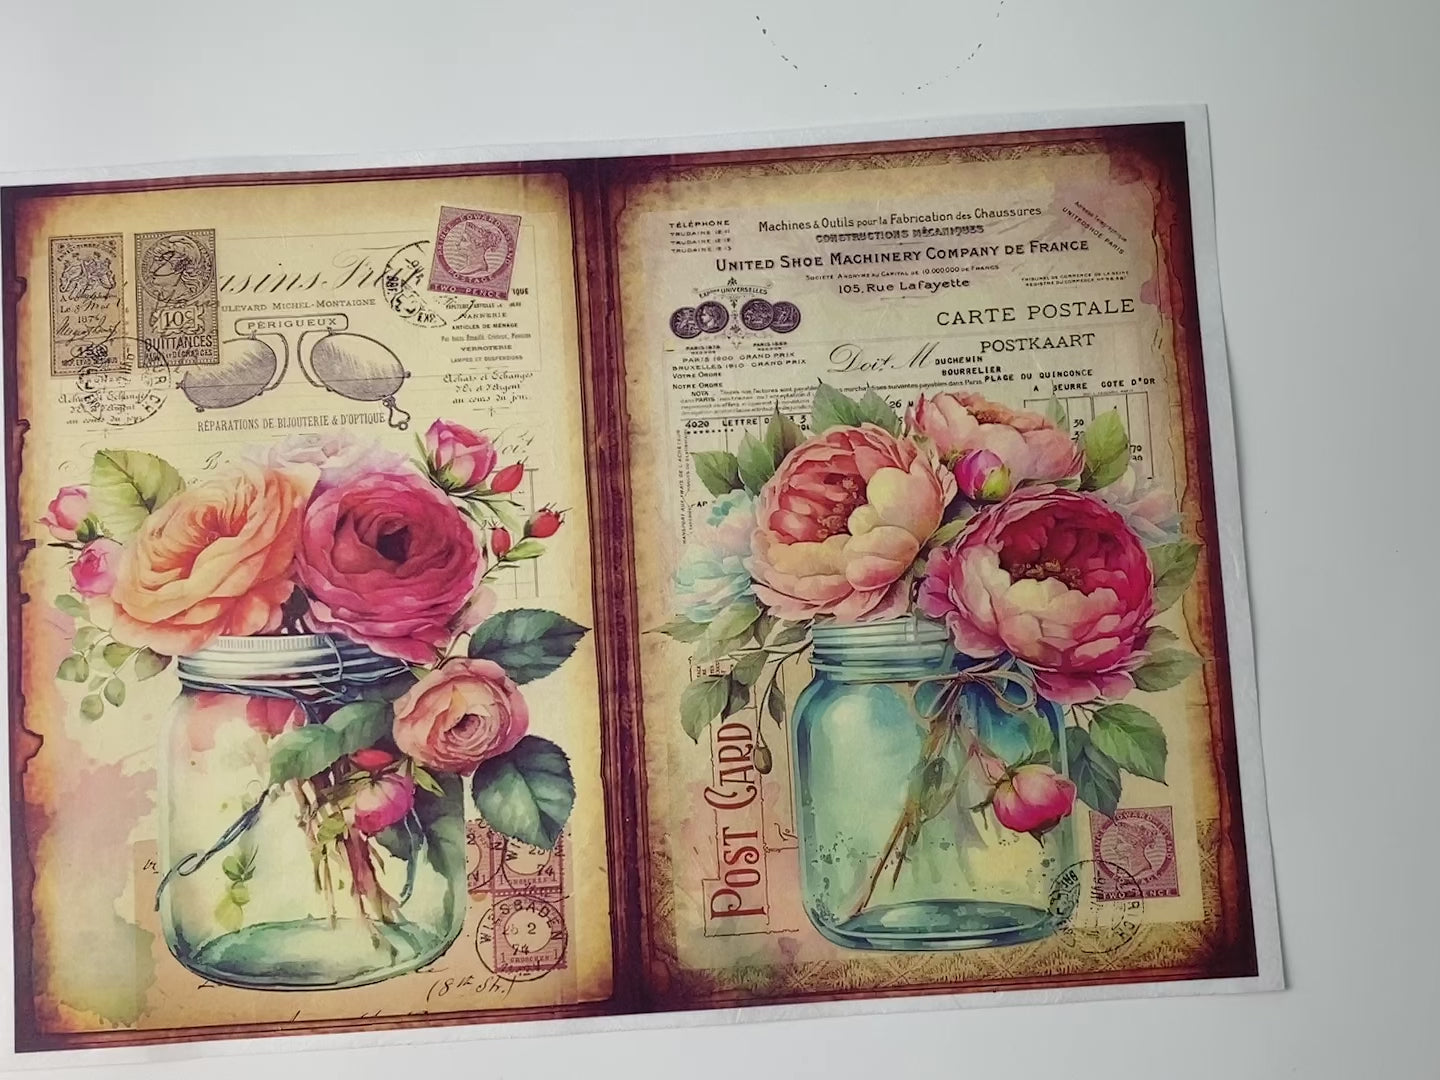 A 14 second video shows a close-up and hand lifting and folding over the top left corner of Decoupage Queen's Flowers in Mason Jar 5 against a white background.